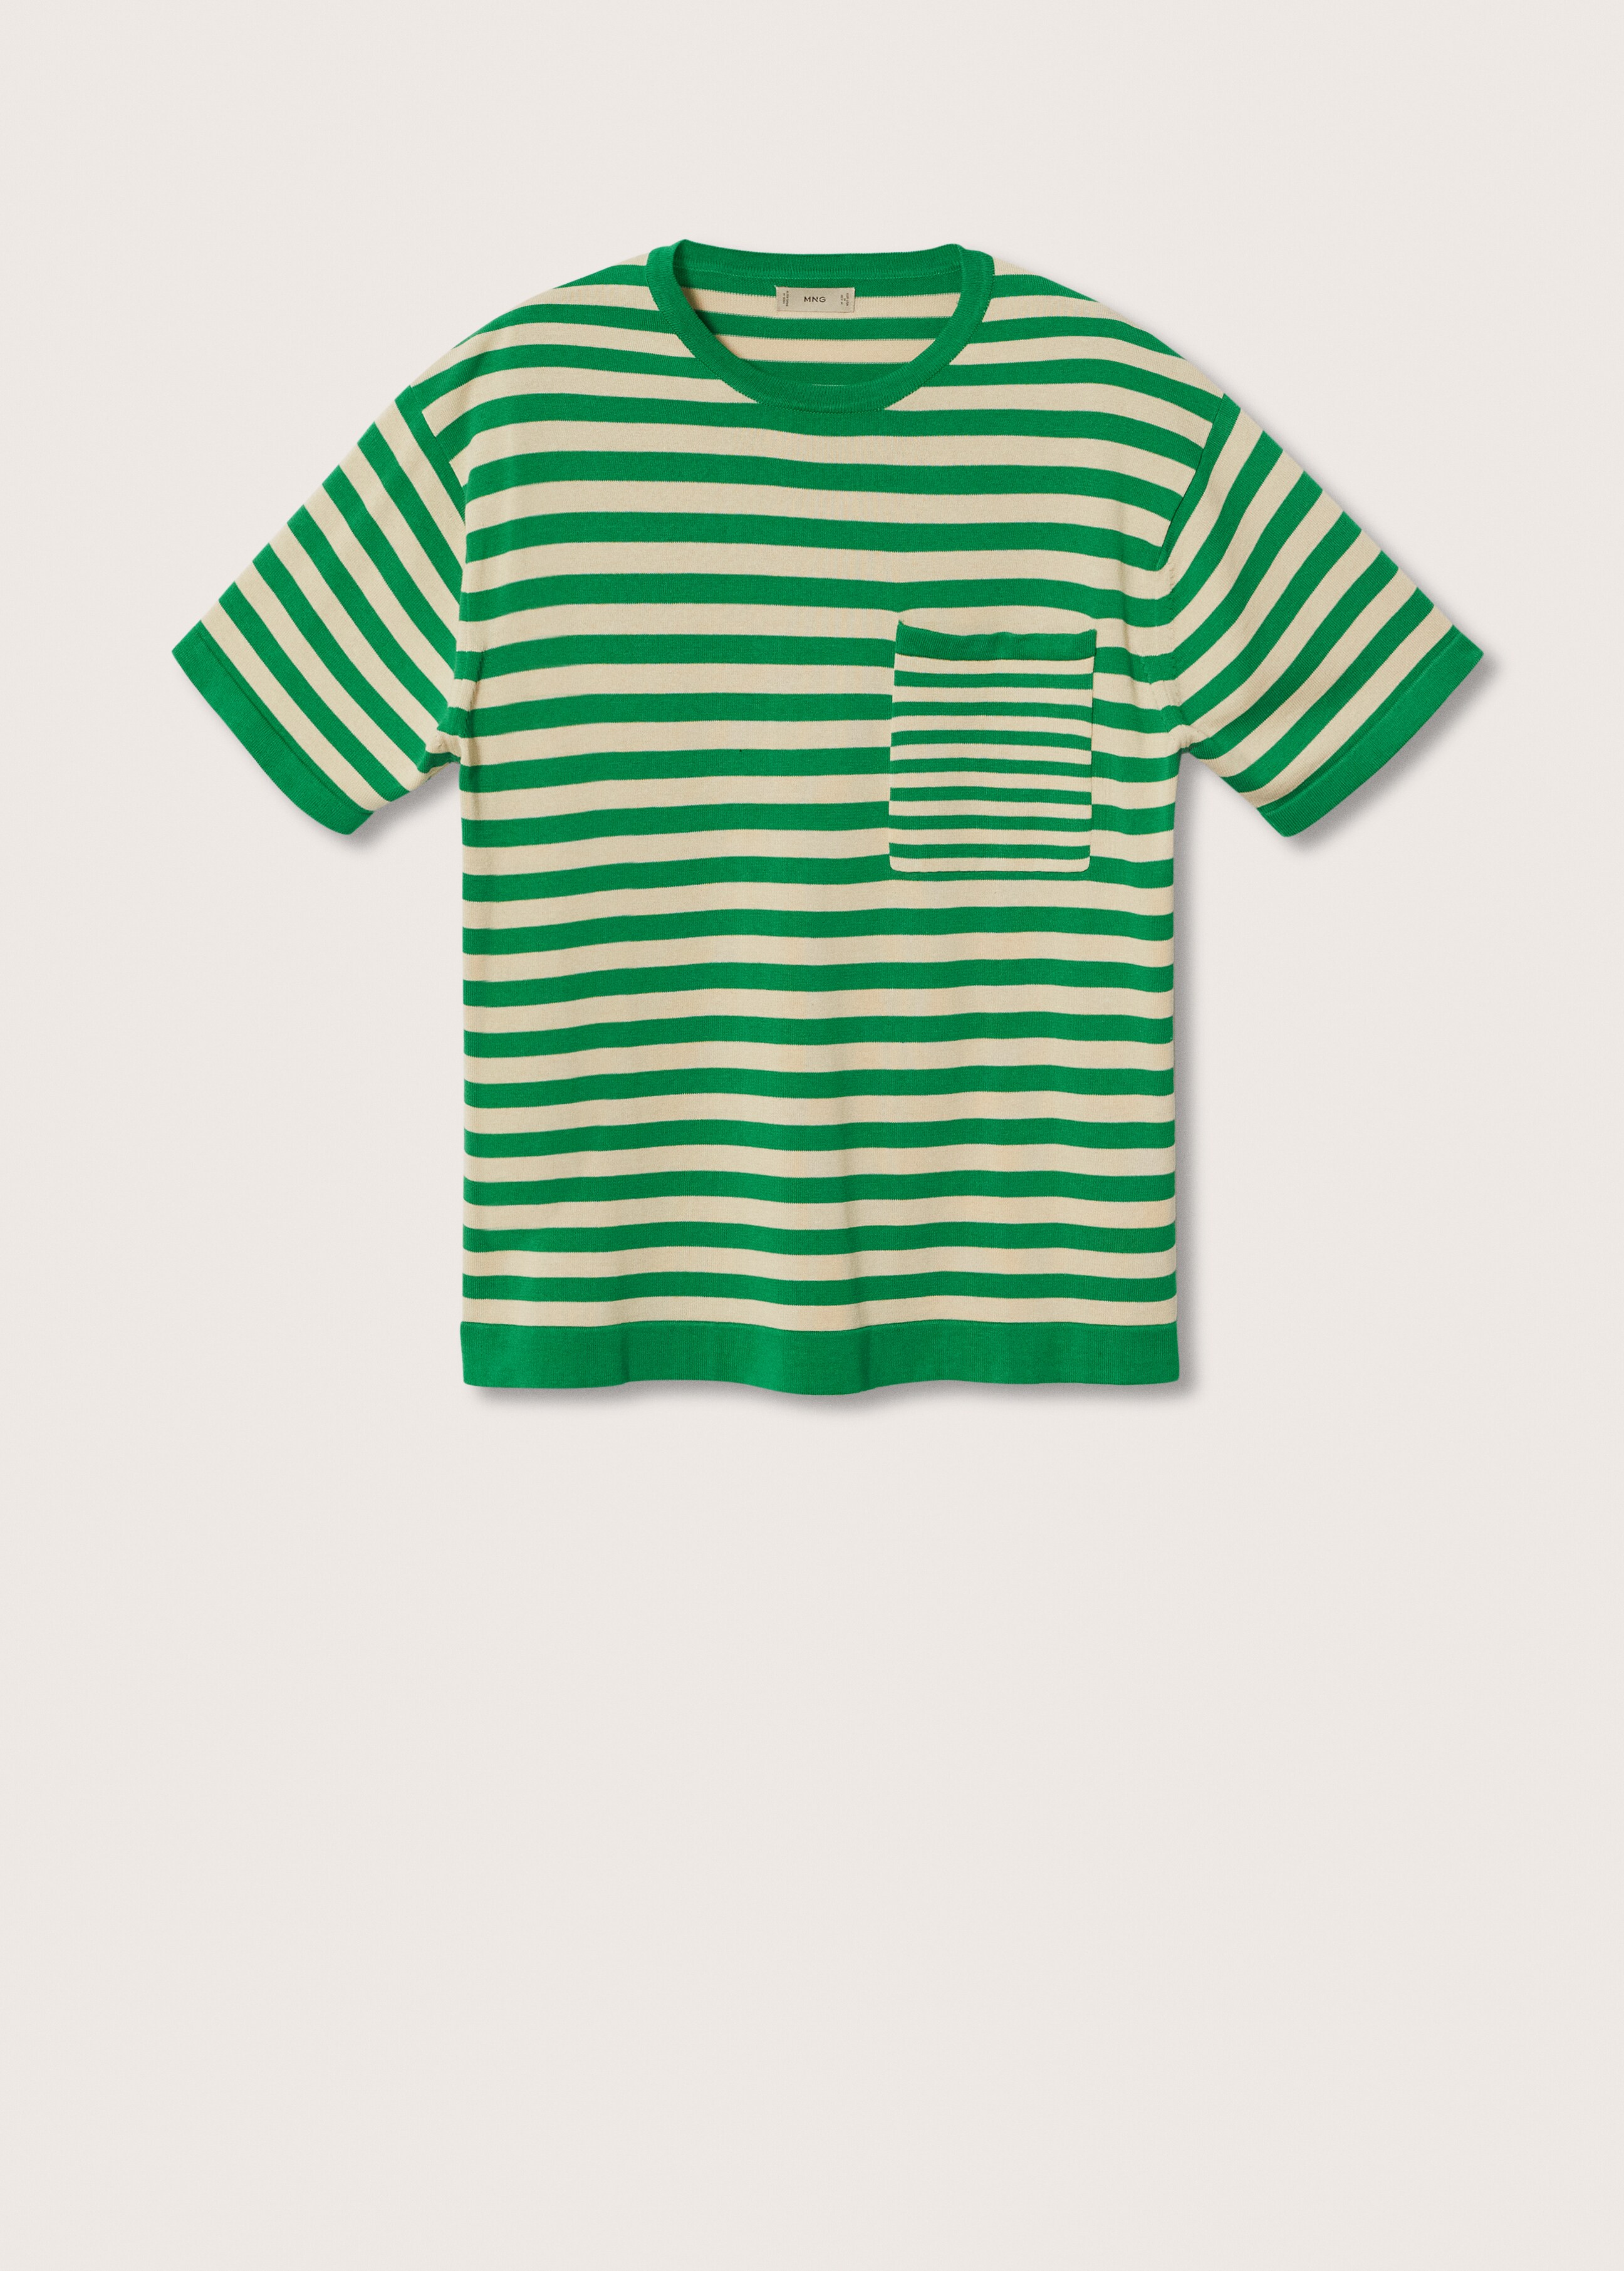 Striped jersey T-shirt - Article without model